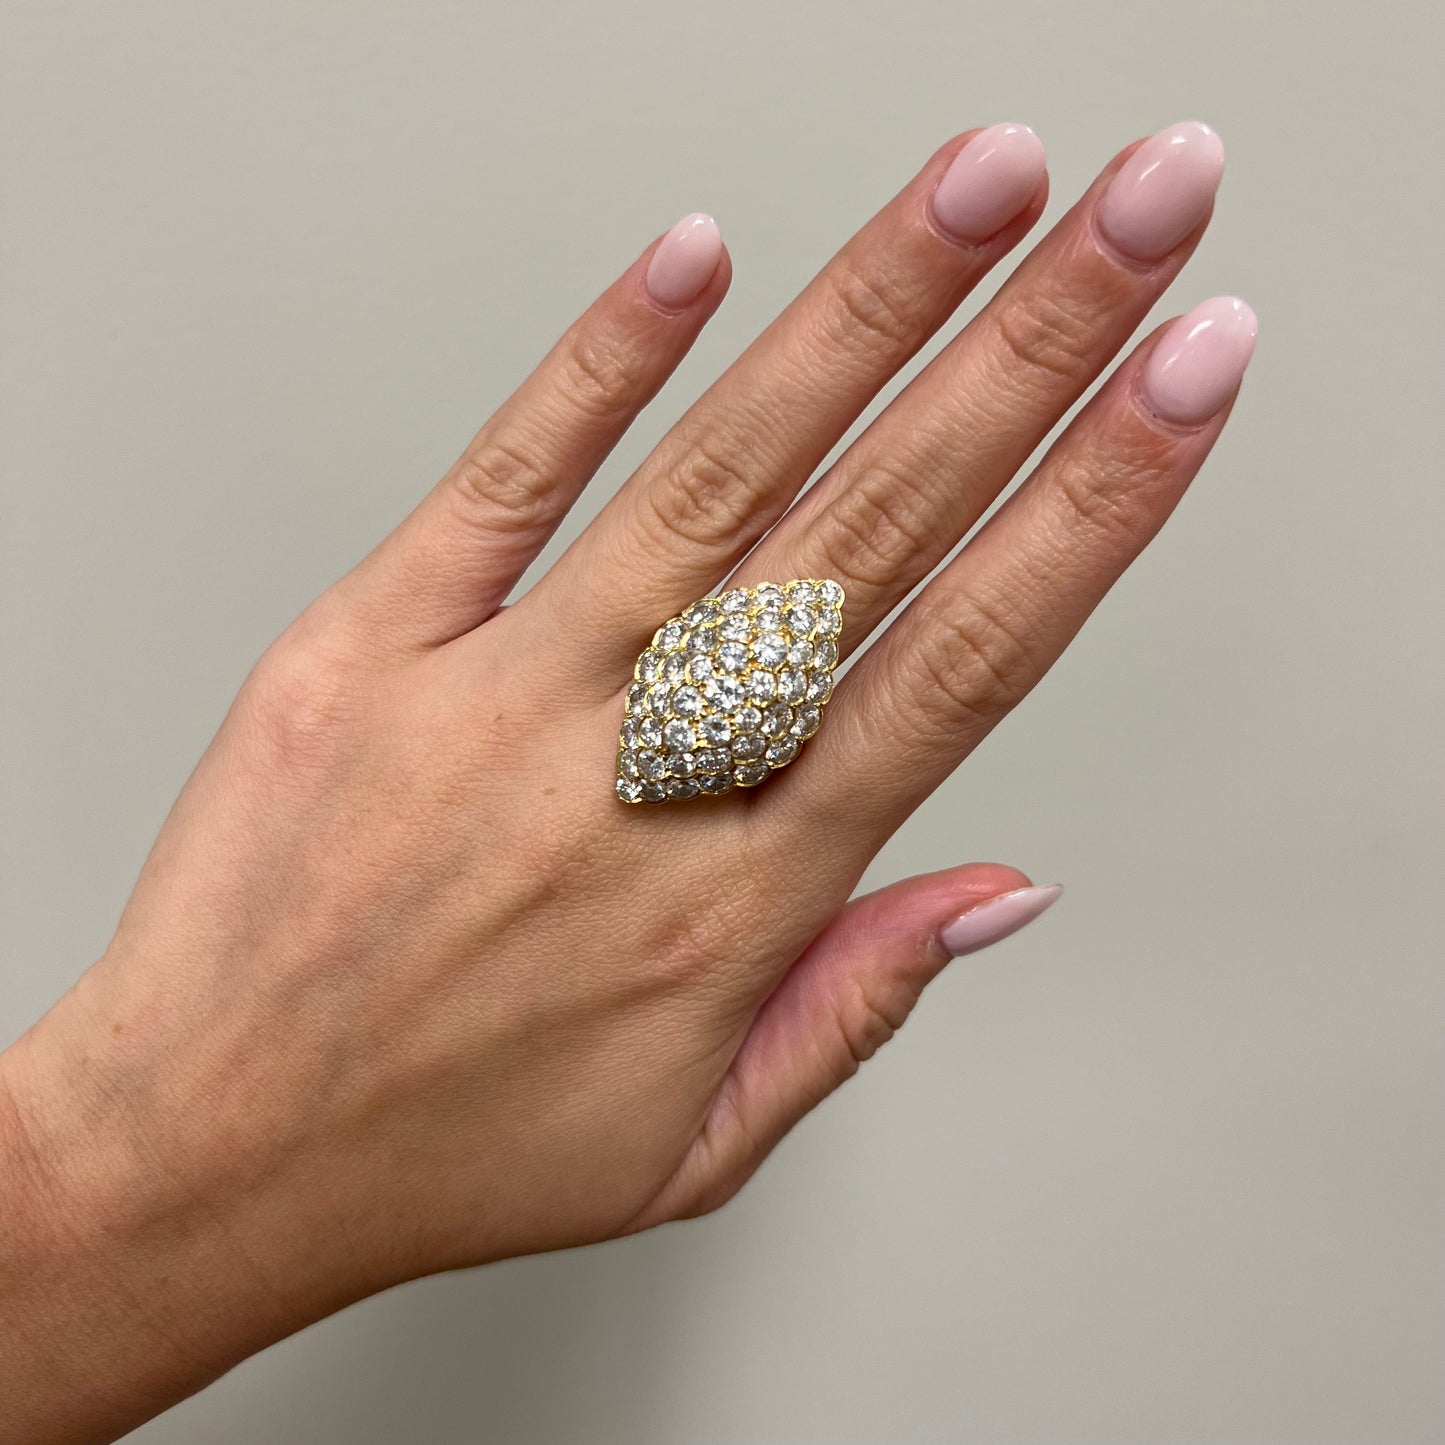 Van Cleef & Arpels French 1970s 18KT Yellow Gold Diamond Cocktail Ring on hand